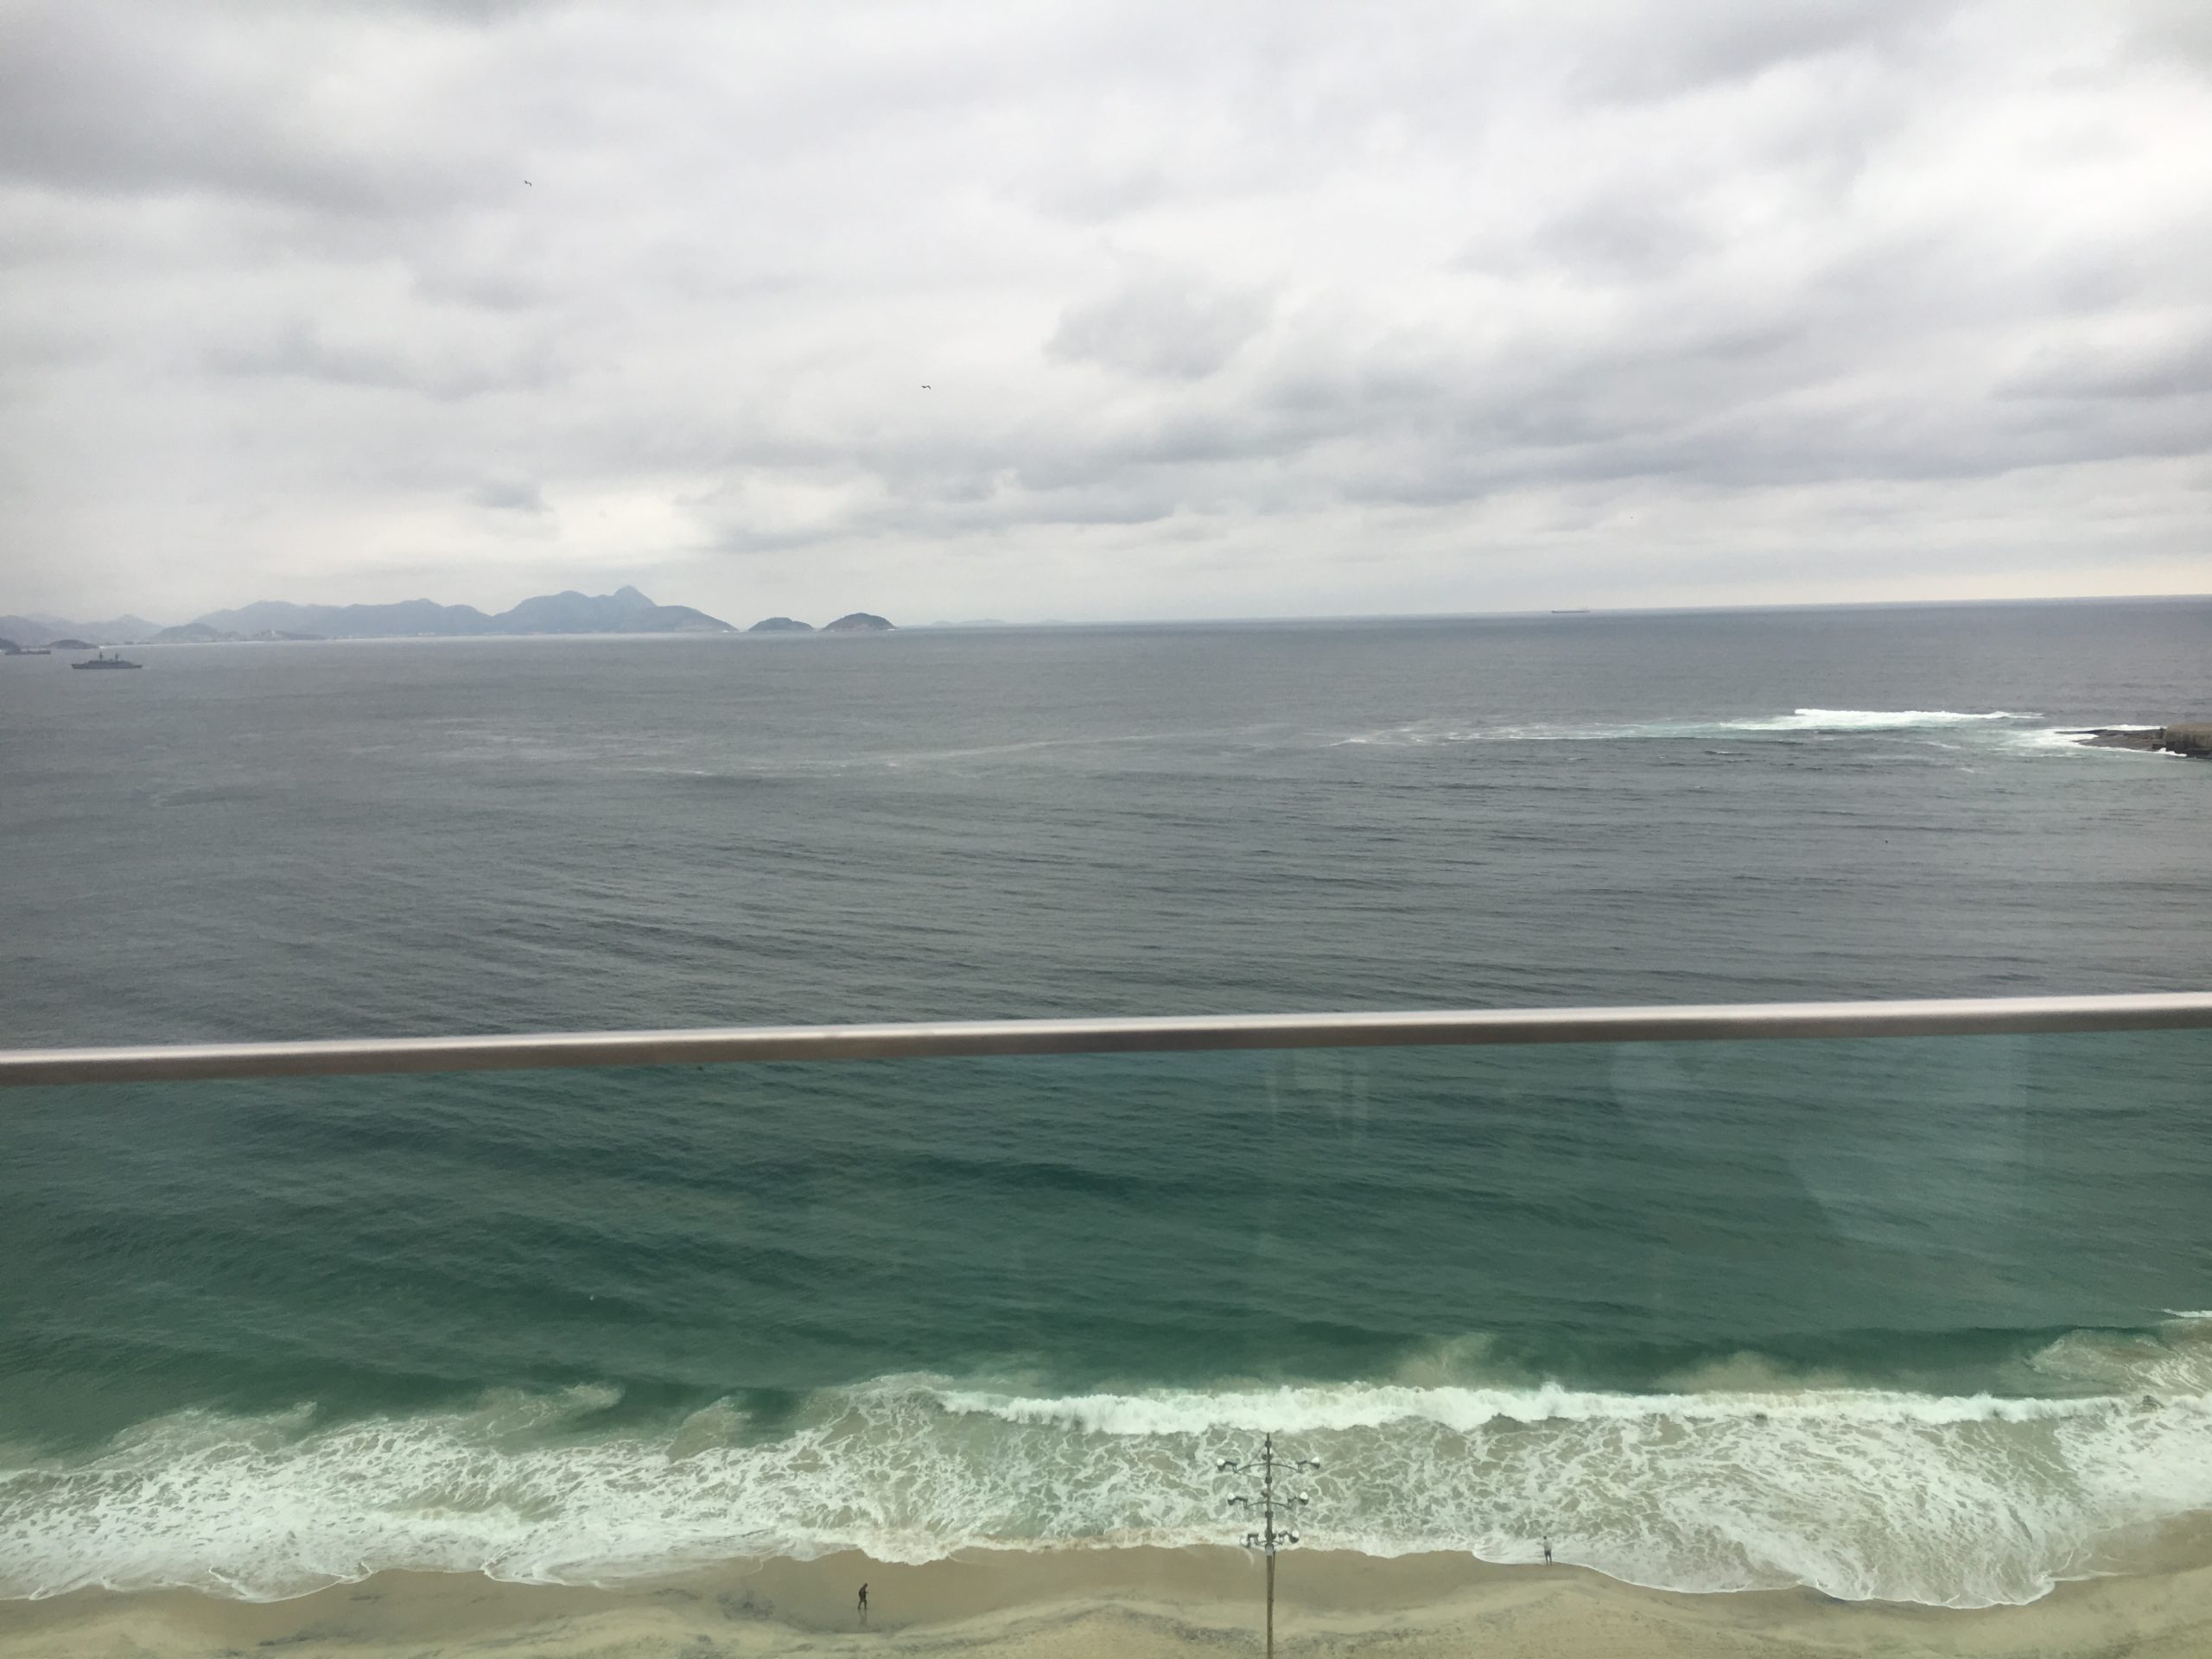 Rio without panorama